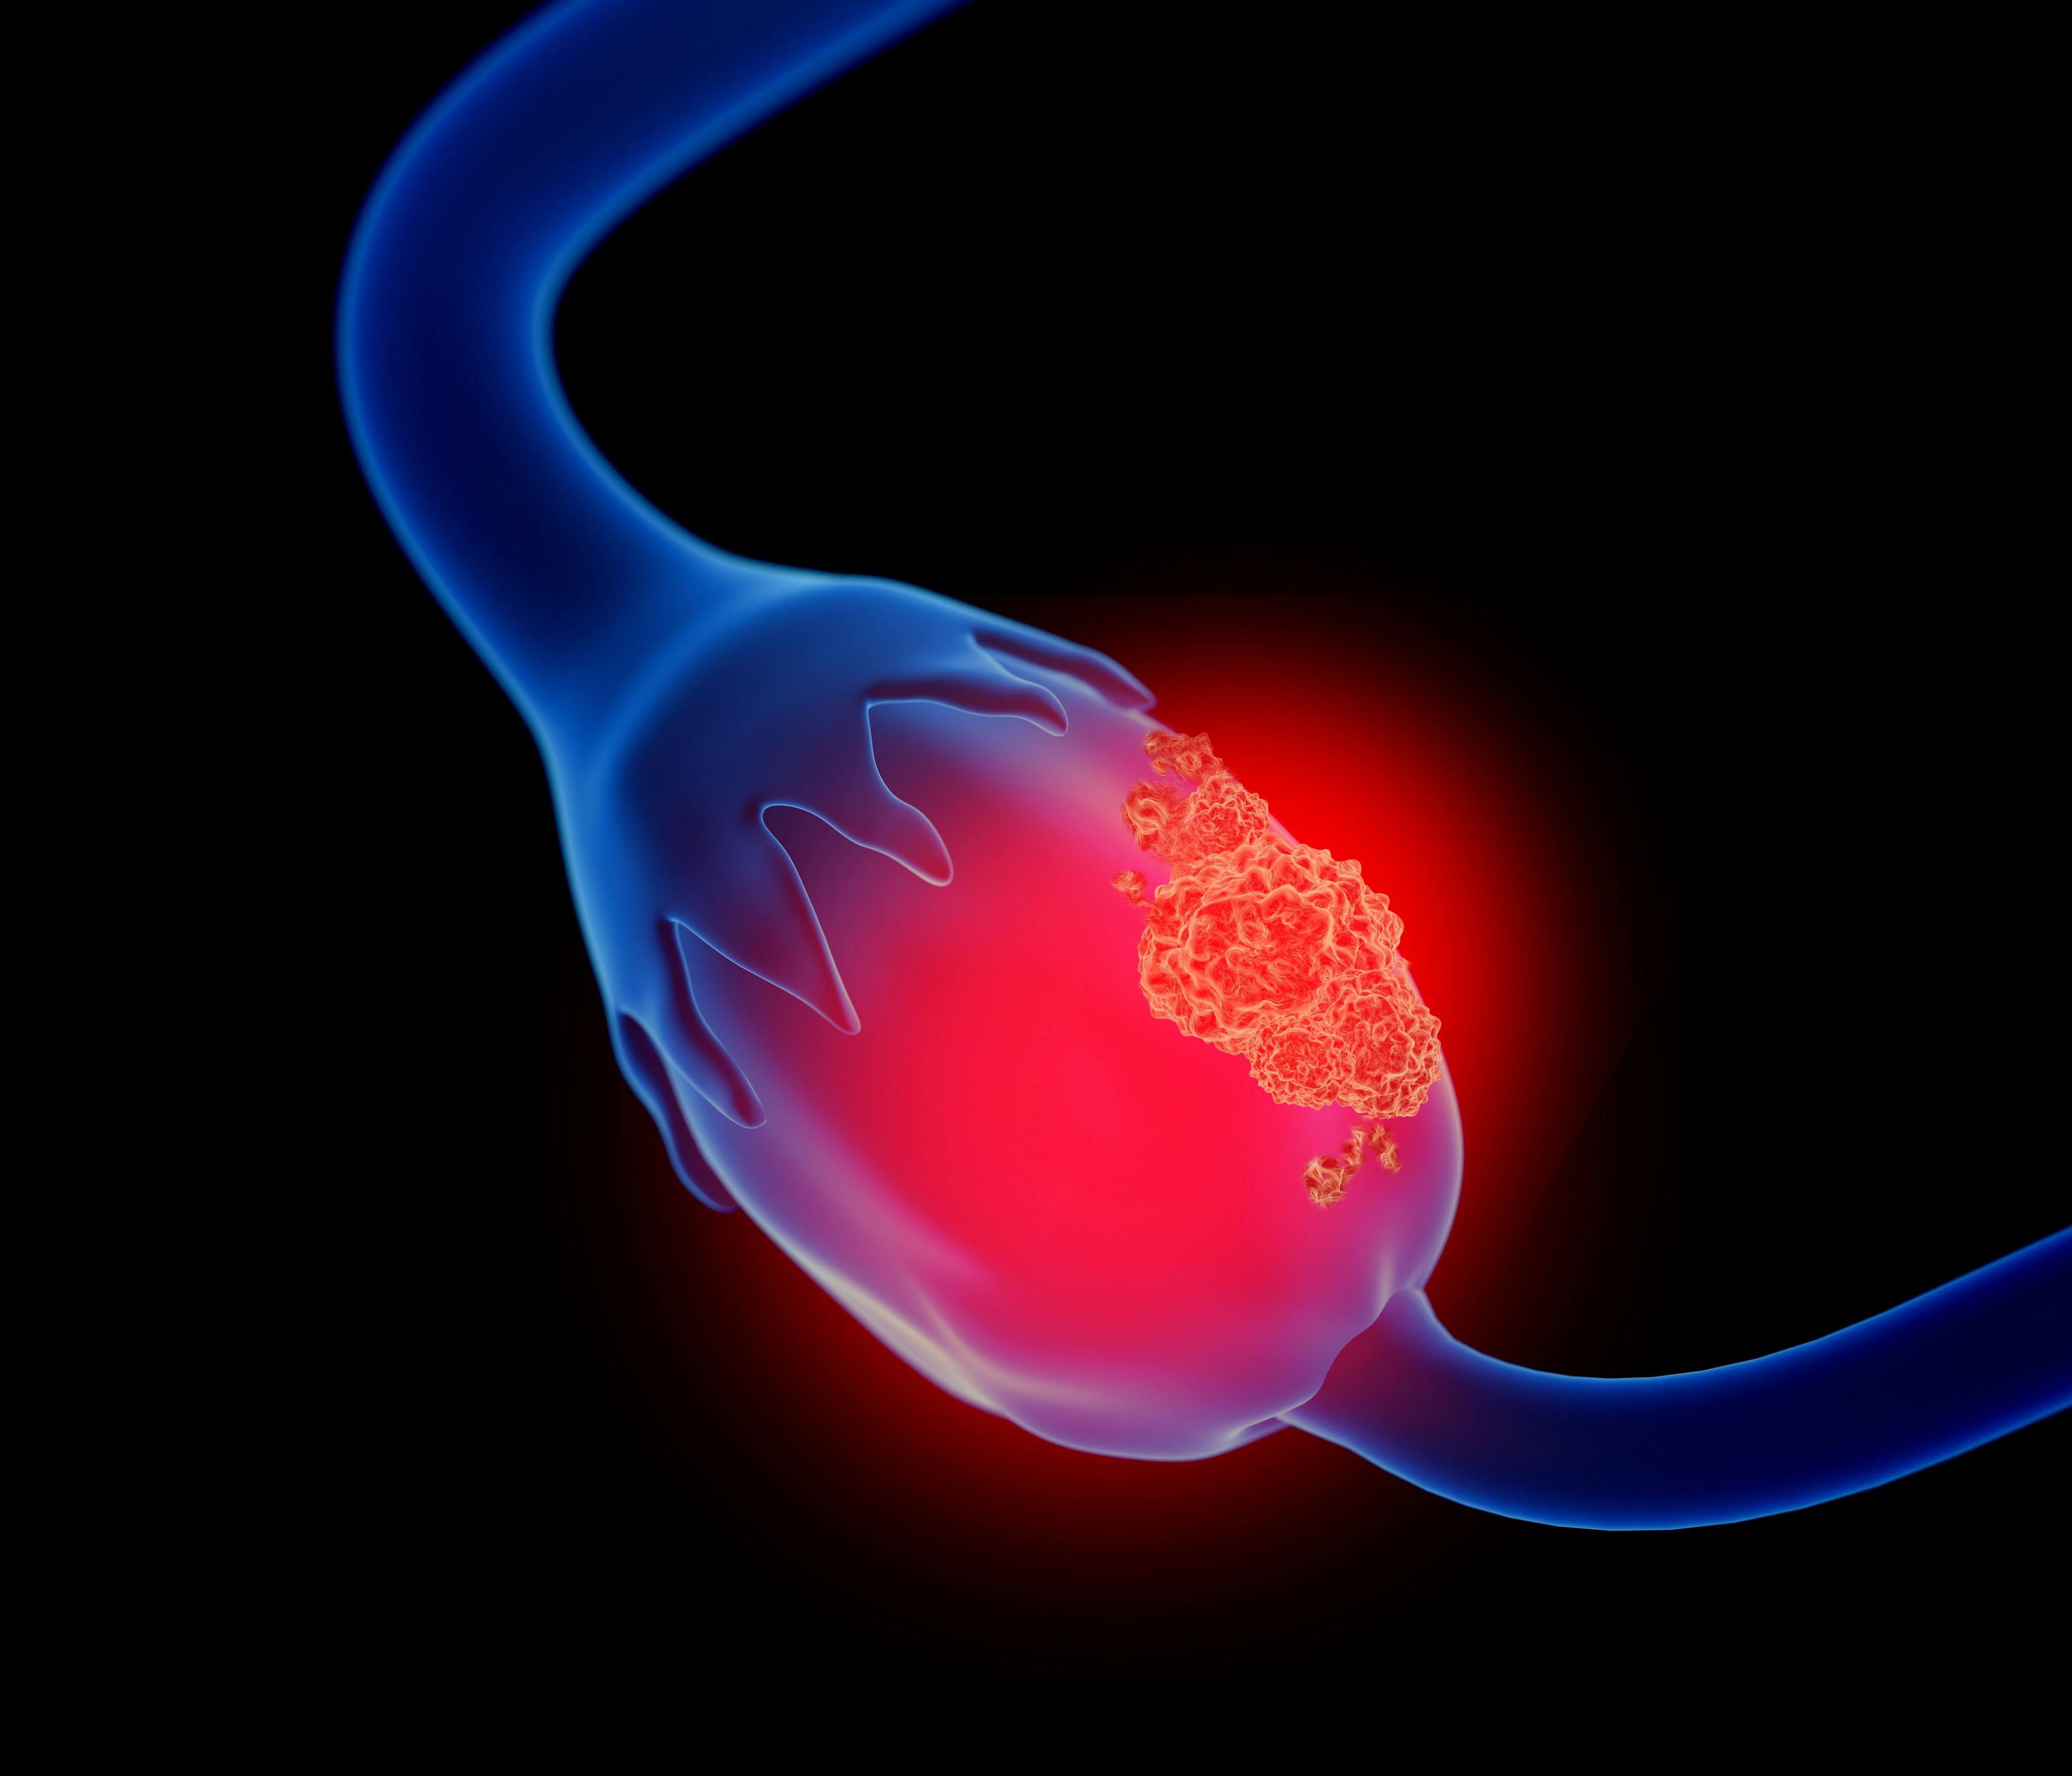 What’s new in biomarker testing for ovarian cancer